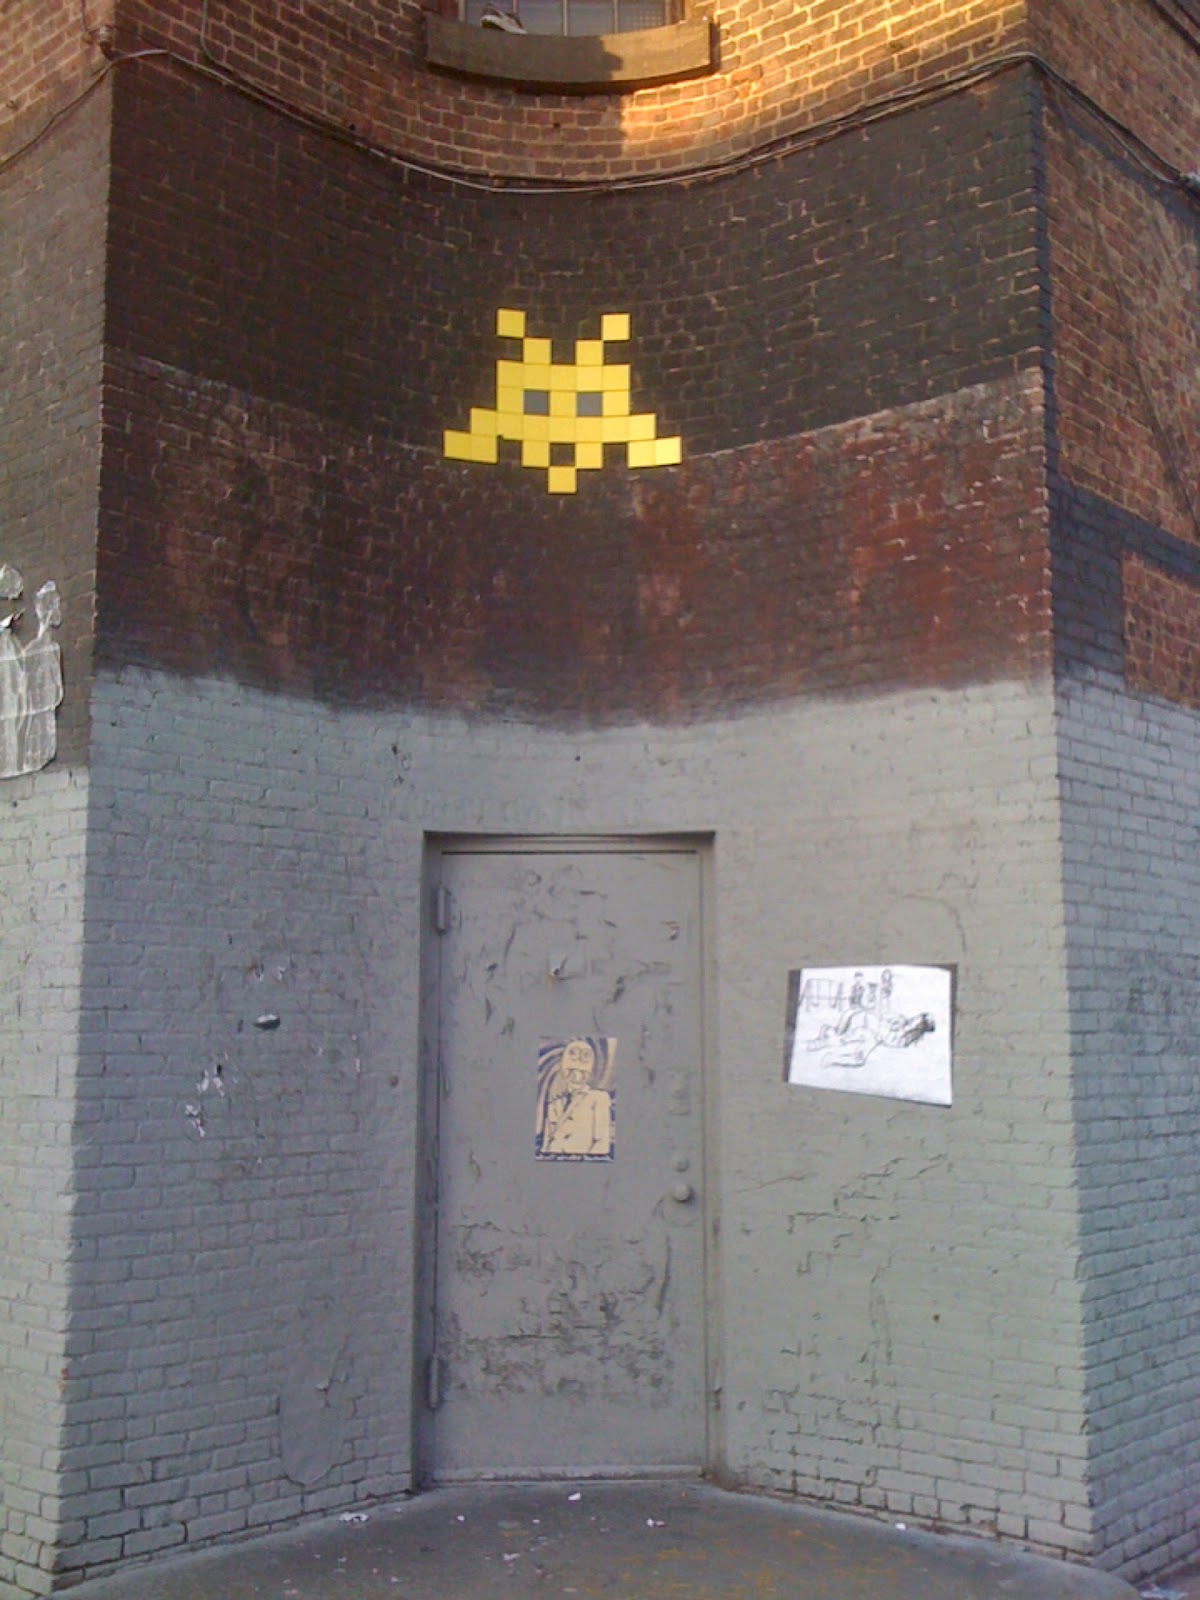 An "invader" from Space Invaders on a wall. 